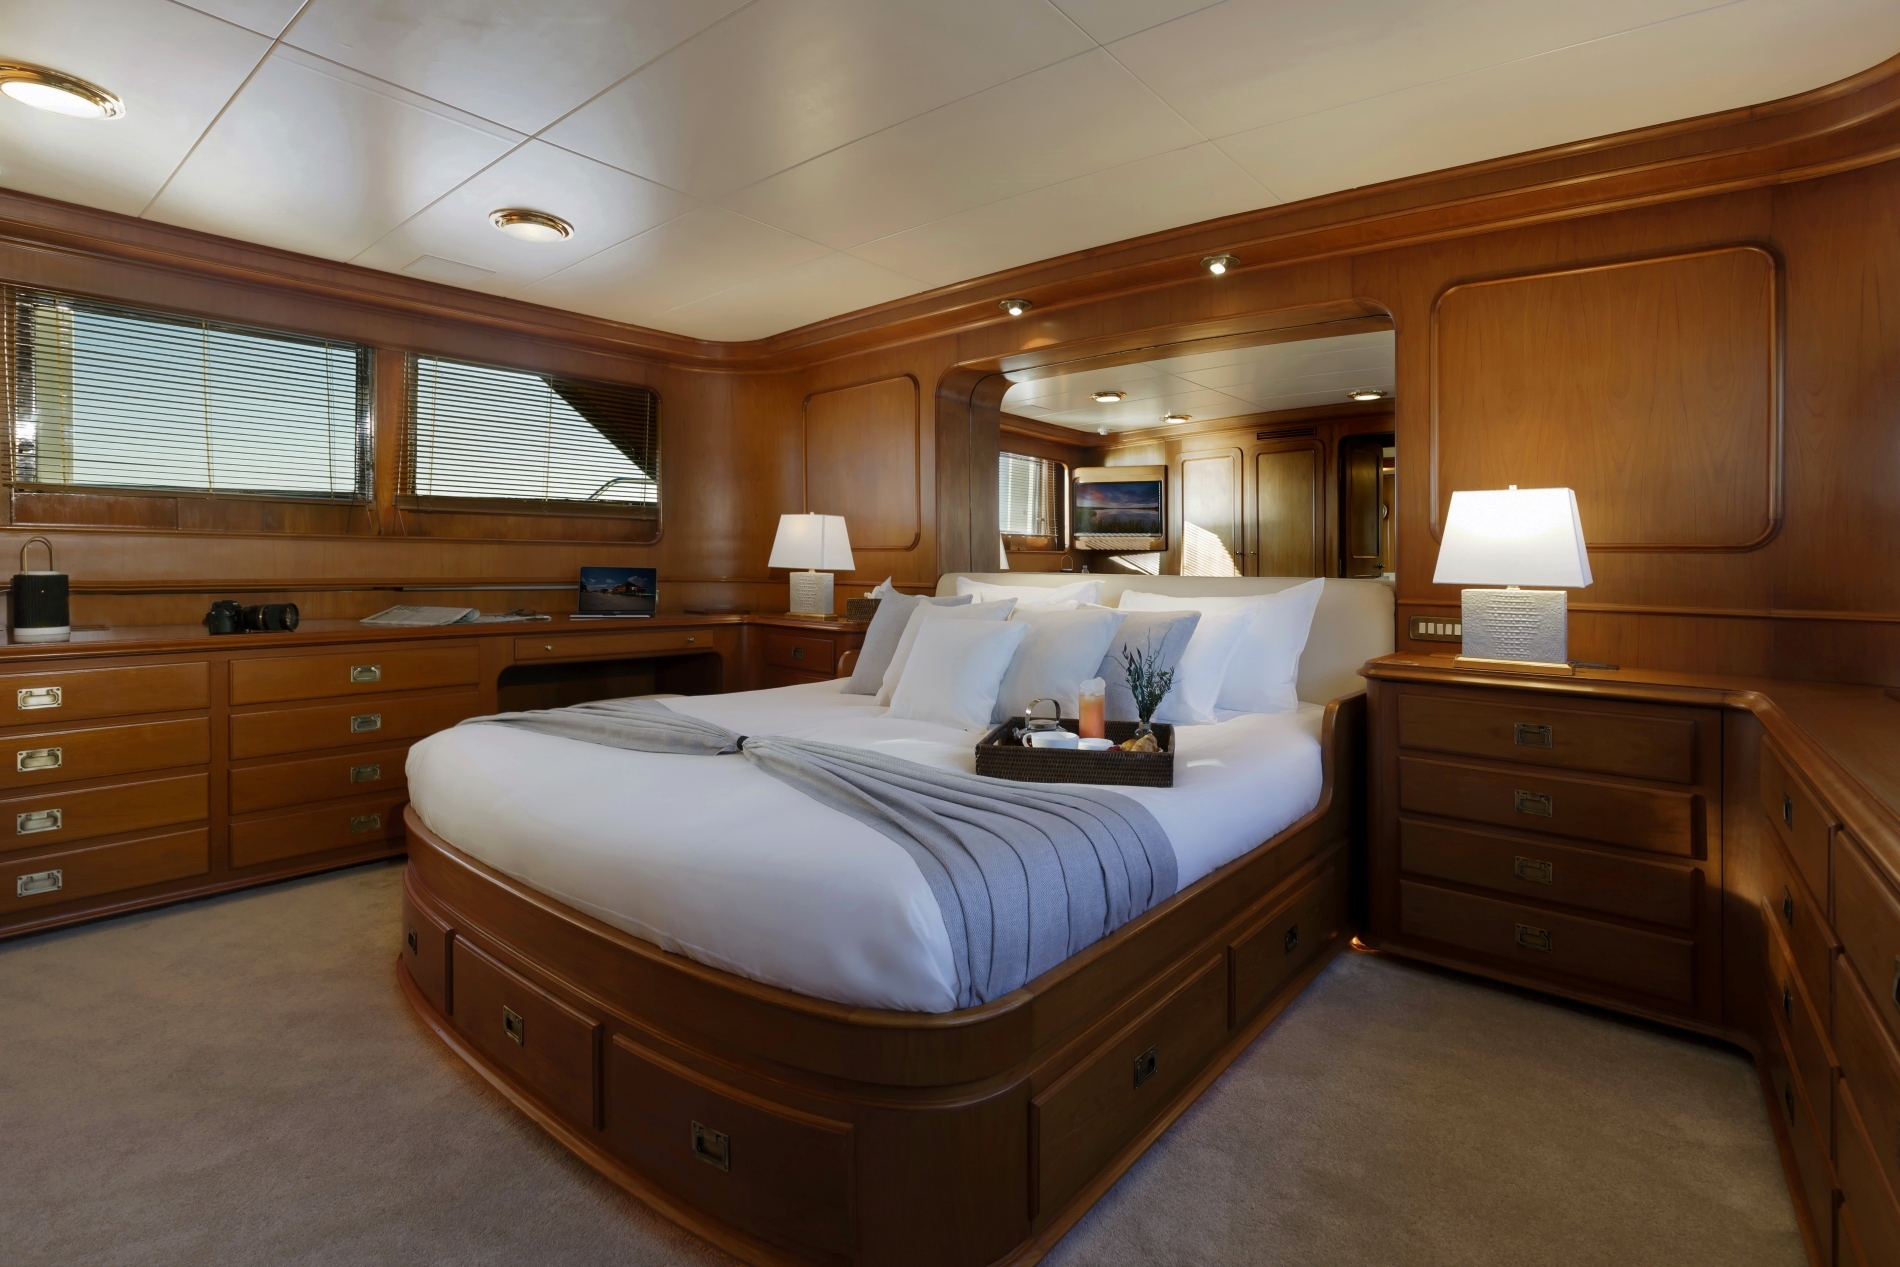 Fully equipped master cabin on main deck 